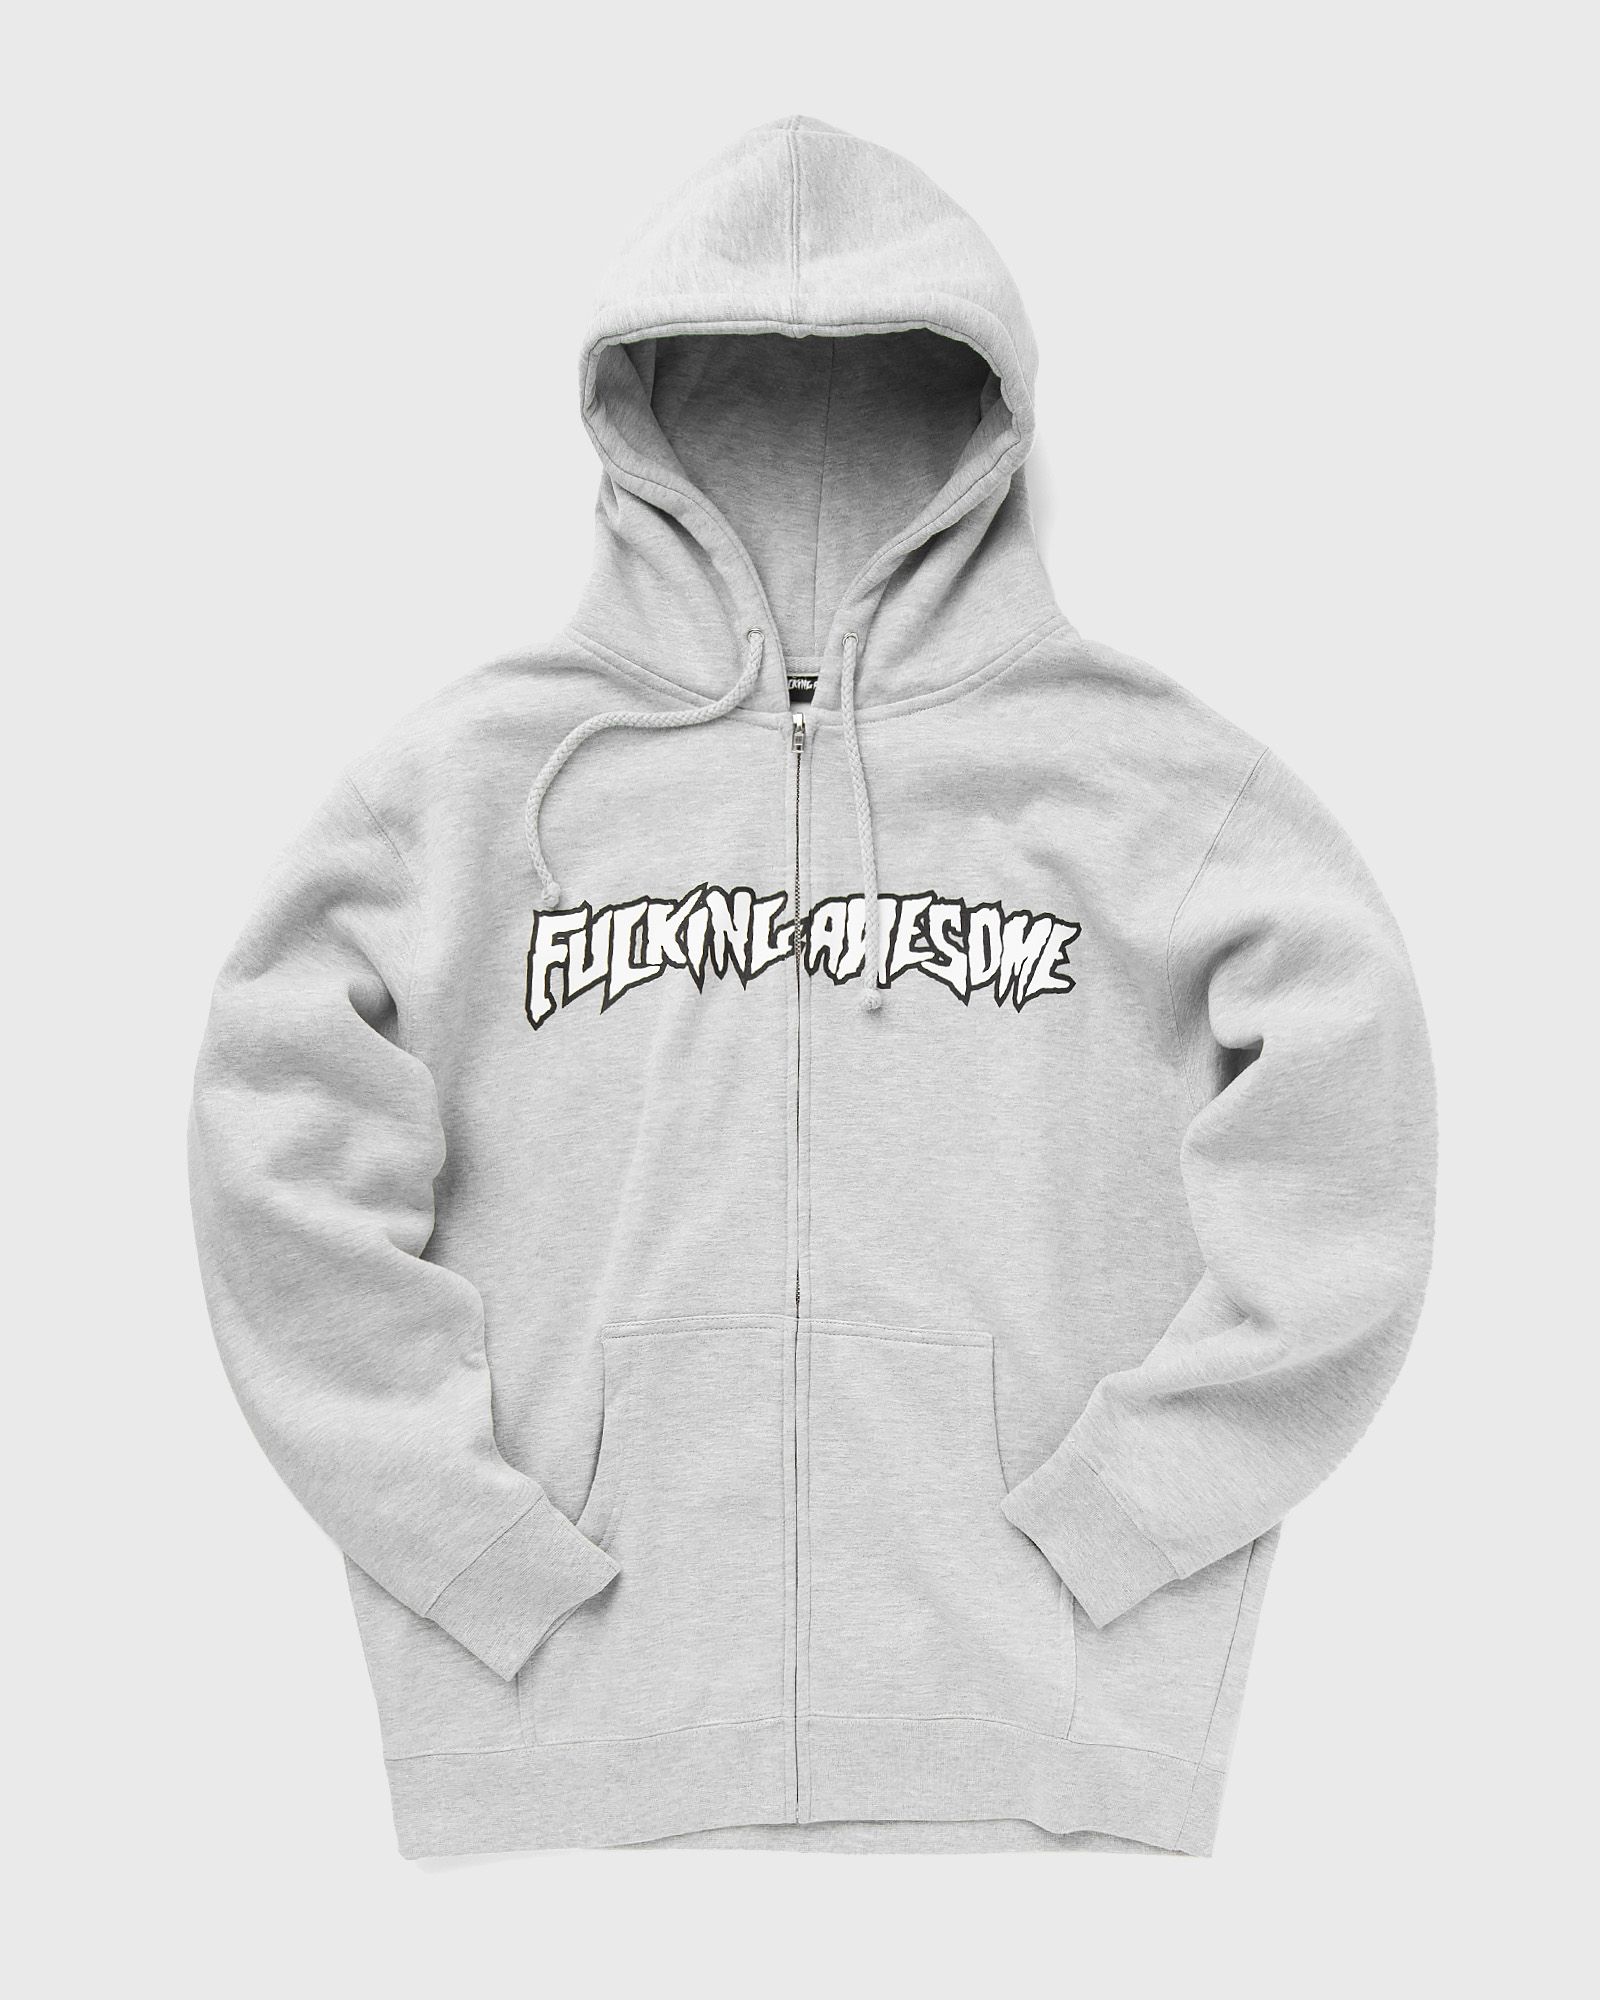 Fucking Awesome Stamp Logo Zip Hoodie men Zippers grey in Größe:L von Fucking Awesome